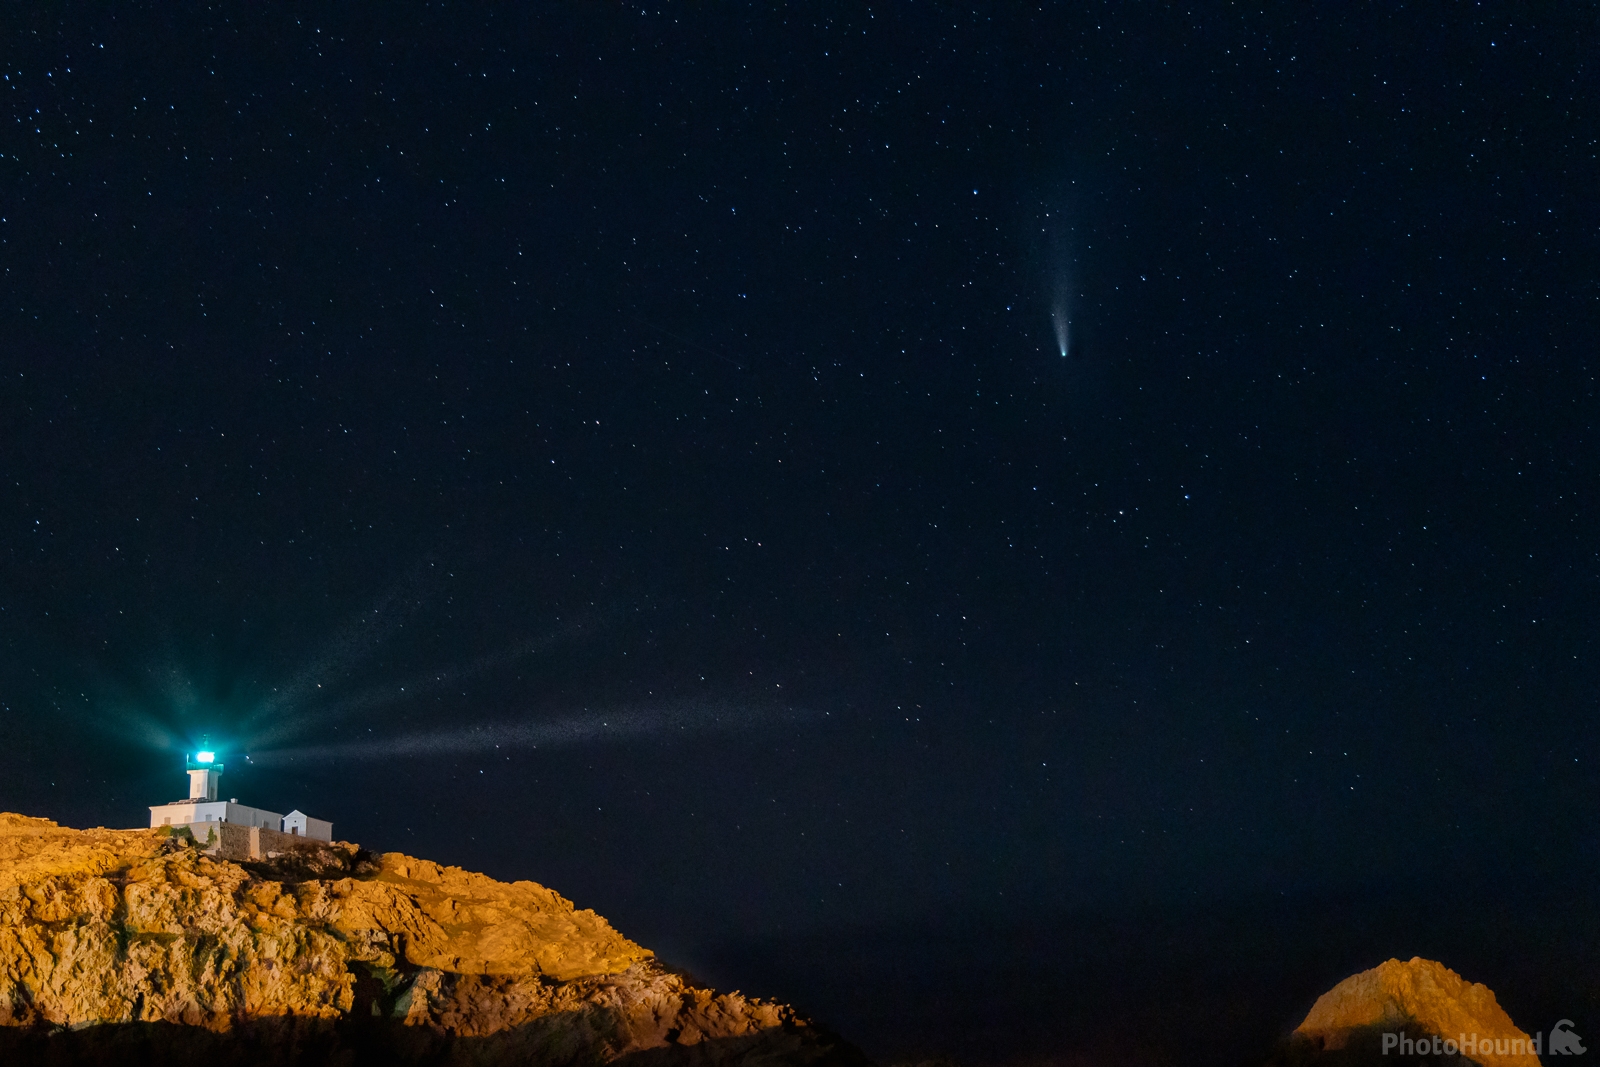 Image of Ile de la Pietra Lighthouse from the South (with Neowise Comet) by Raimondo Giamberduca